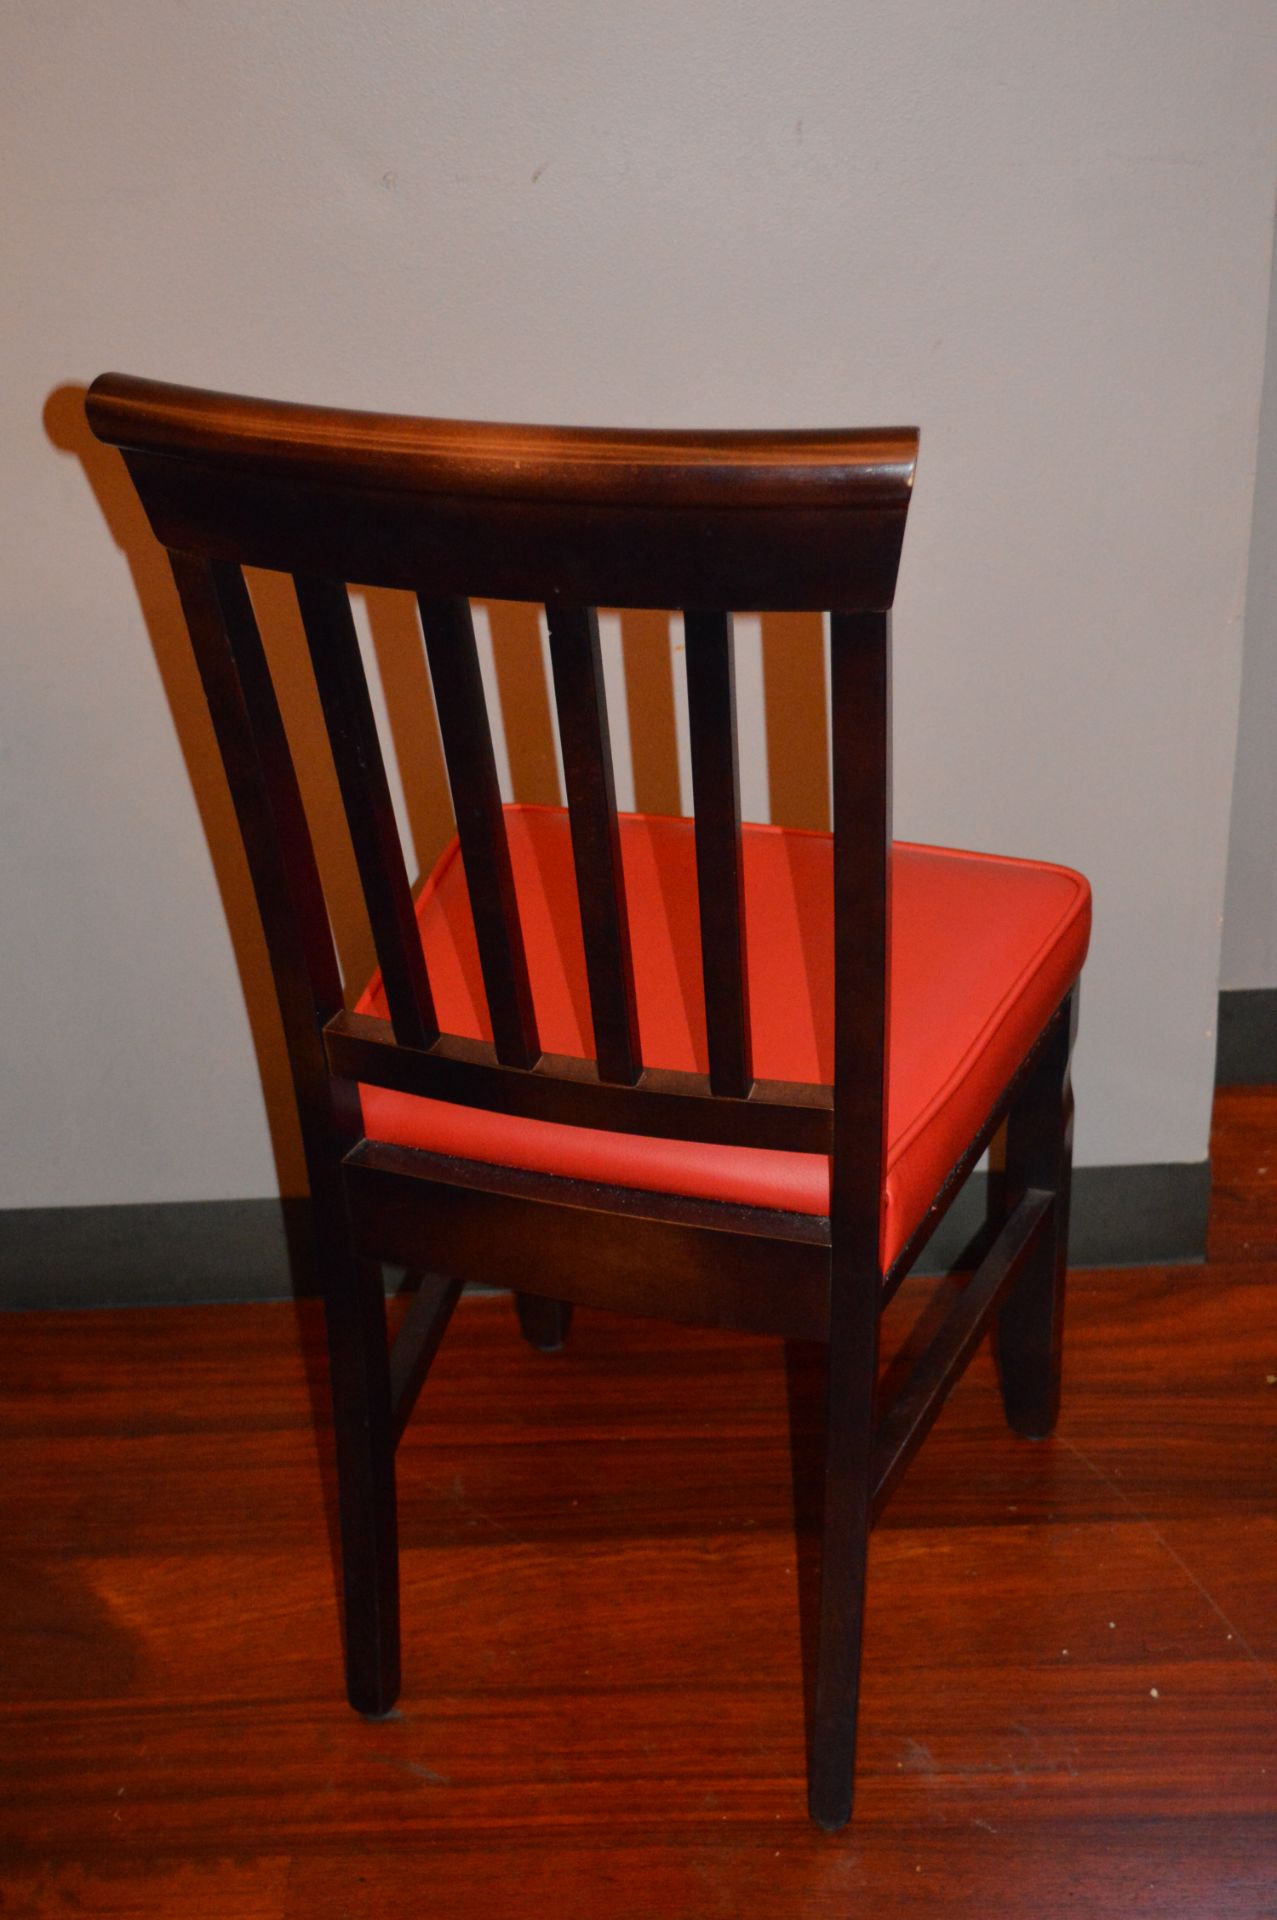 4 x High Back Dining Chairs With Red Leather Seat Cushions and Studded Detail - Hardwoord Frames - - Image 4 of 5